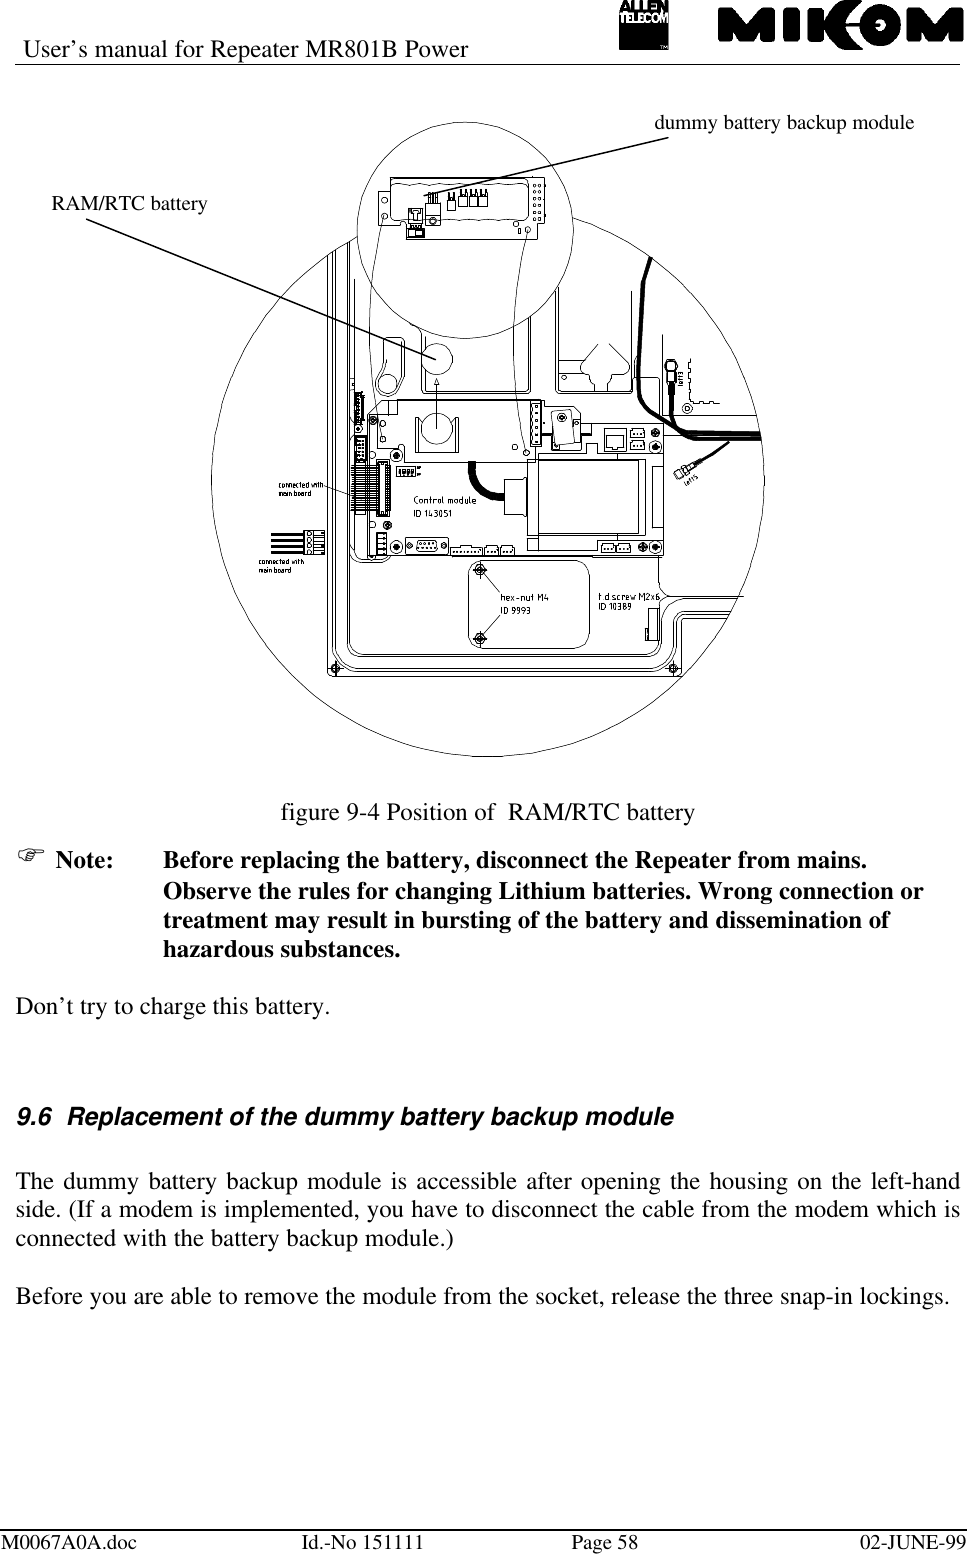 User’s manual for Repeater MR801B PowerM0067A0A.doc Id.-No 151111 Page 58 02-JUNE-99figure 9-4 Position of  RAM/RTC batteryF Note: Before replacing the battery, disconnect the Repeater from mains.Observe the rules for changing Lithium batteries. Wrong connection ortreatment may result in bursting of the battery and dissemination ofhazardous substances.Don’t try to charge this battery.9.6 Replacement of the dummy battery backup moduleThe dummy battery backup module is accessible after opening the housing on the left-handside. (If a modem is implemented, you have to disconnect the cable from the modem which isconnected with the battery backup module.)Before you are able to remove the module from the socket, release the three snap-in lockings.RAM/RTC batterydummy battery backup module